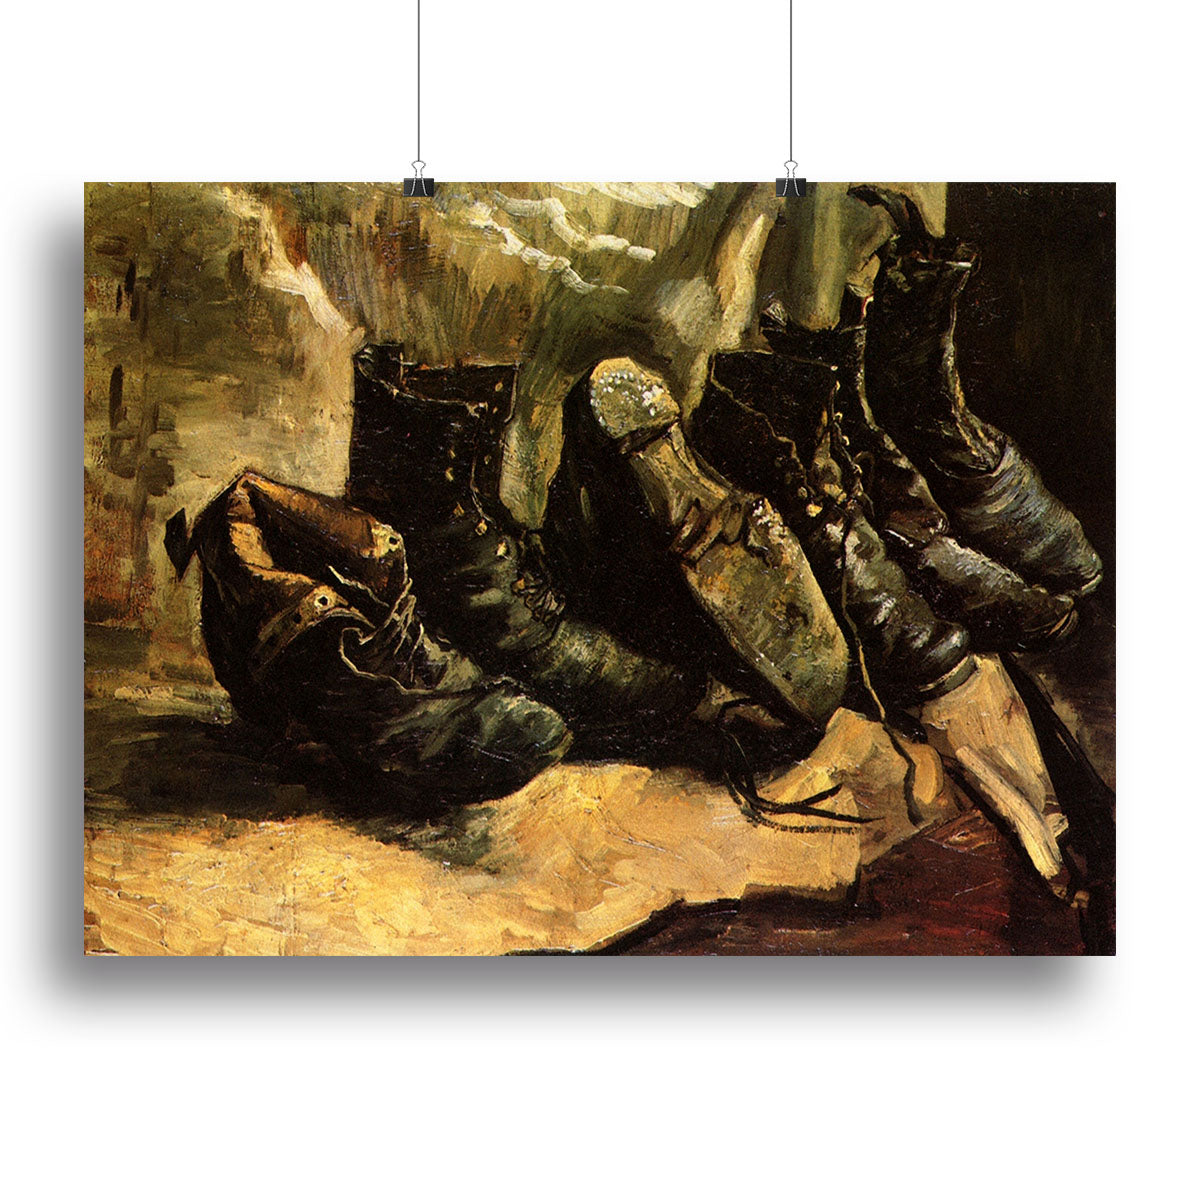 Three Pairs of Shoes by Van Gogh Canvas Print or Poster - Canvas Art Rocks - 2